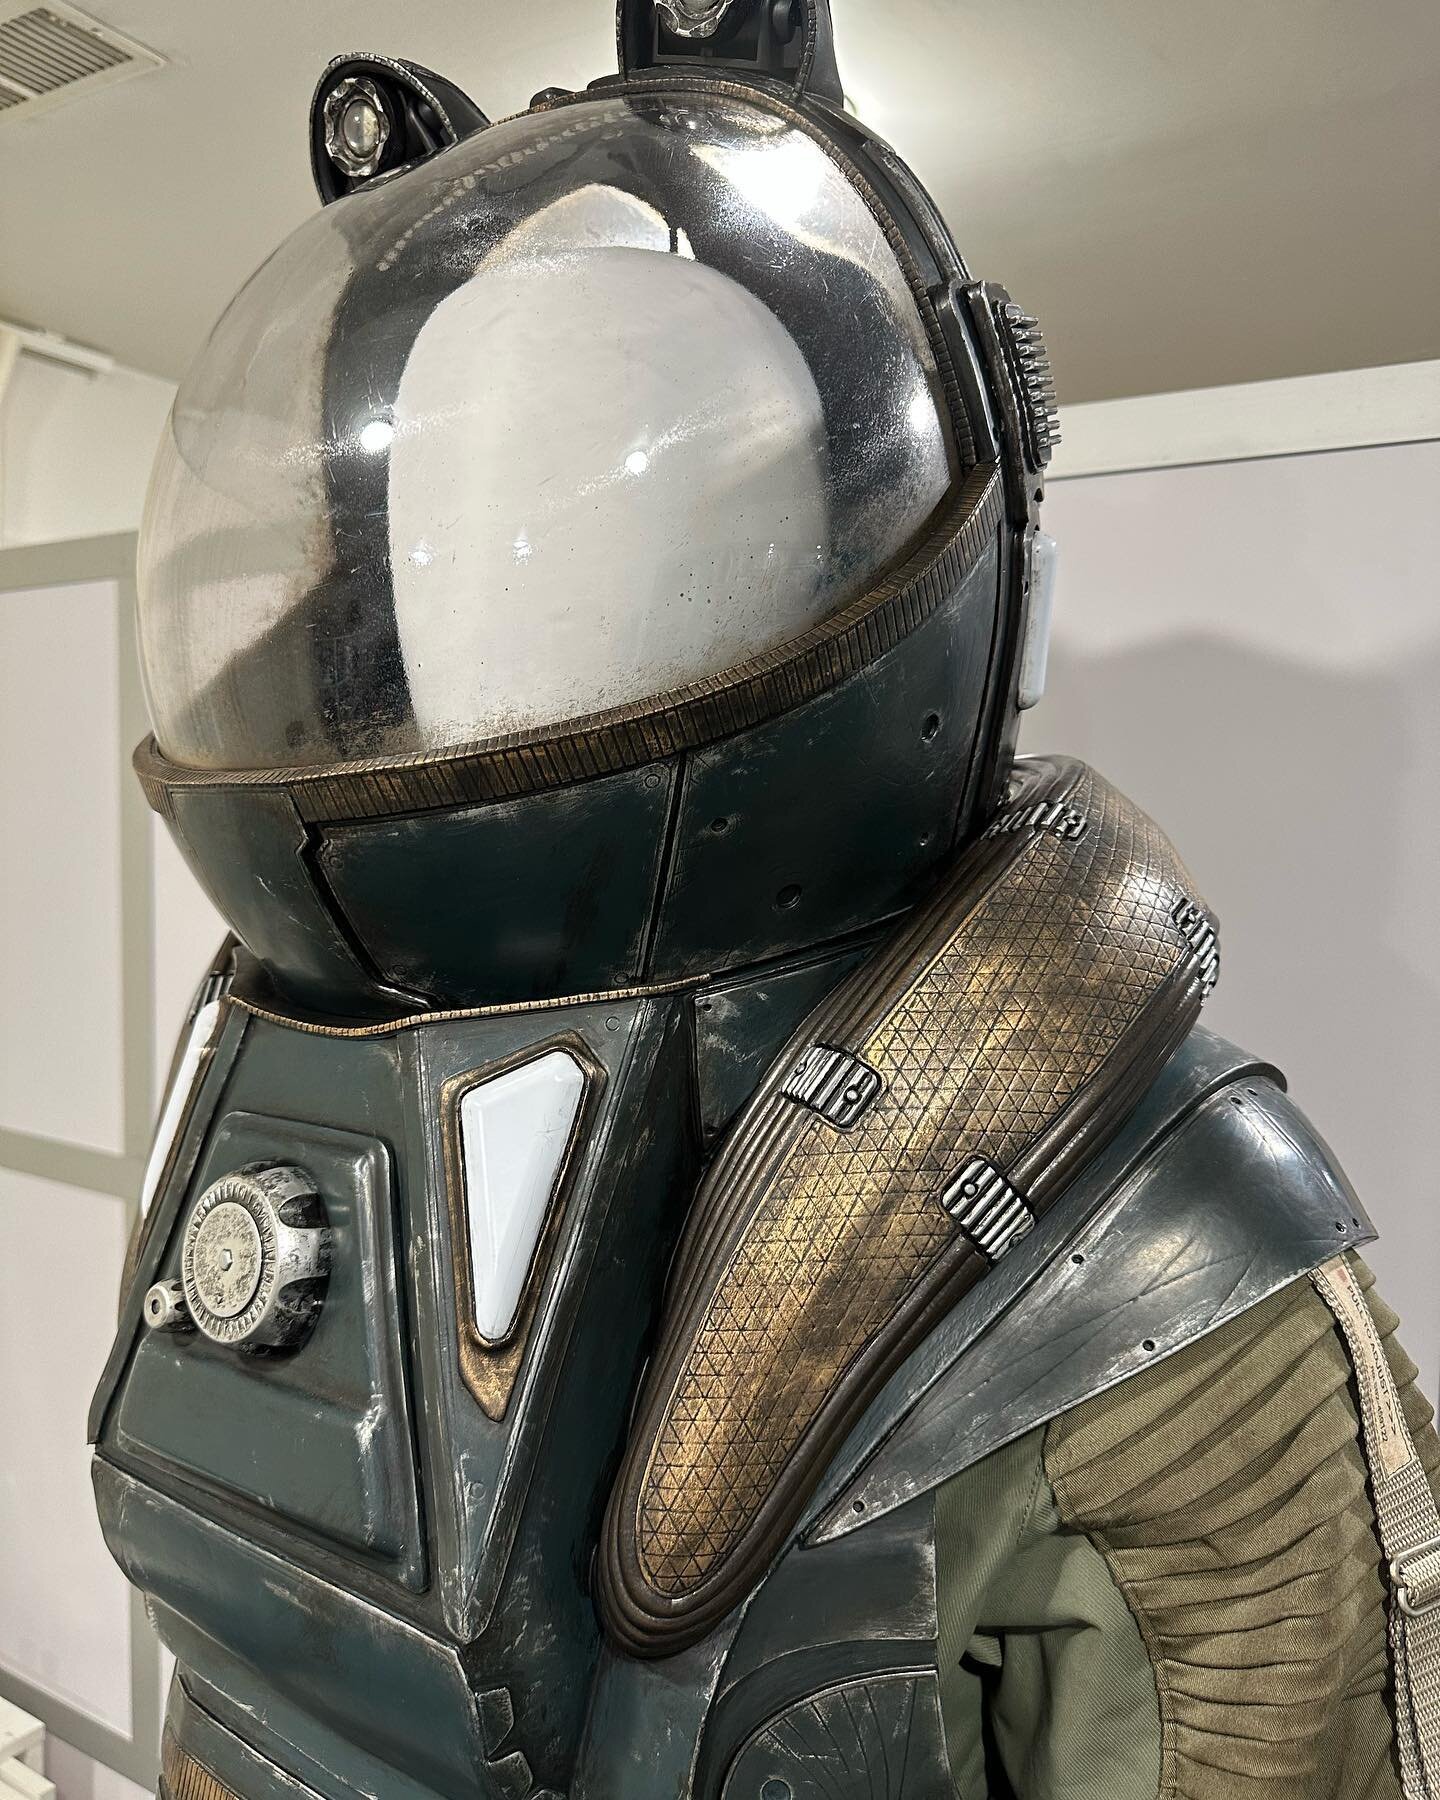 Walking into the studio seeing this everyday, it&rsquo;s crazy to think how far this spacesuit costume has come from where it started. Swipe for a few shots of the early foam crafting/mock up stage, I&rsquo;ll have to do a better recap later, but we&